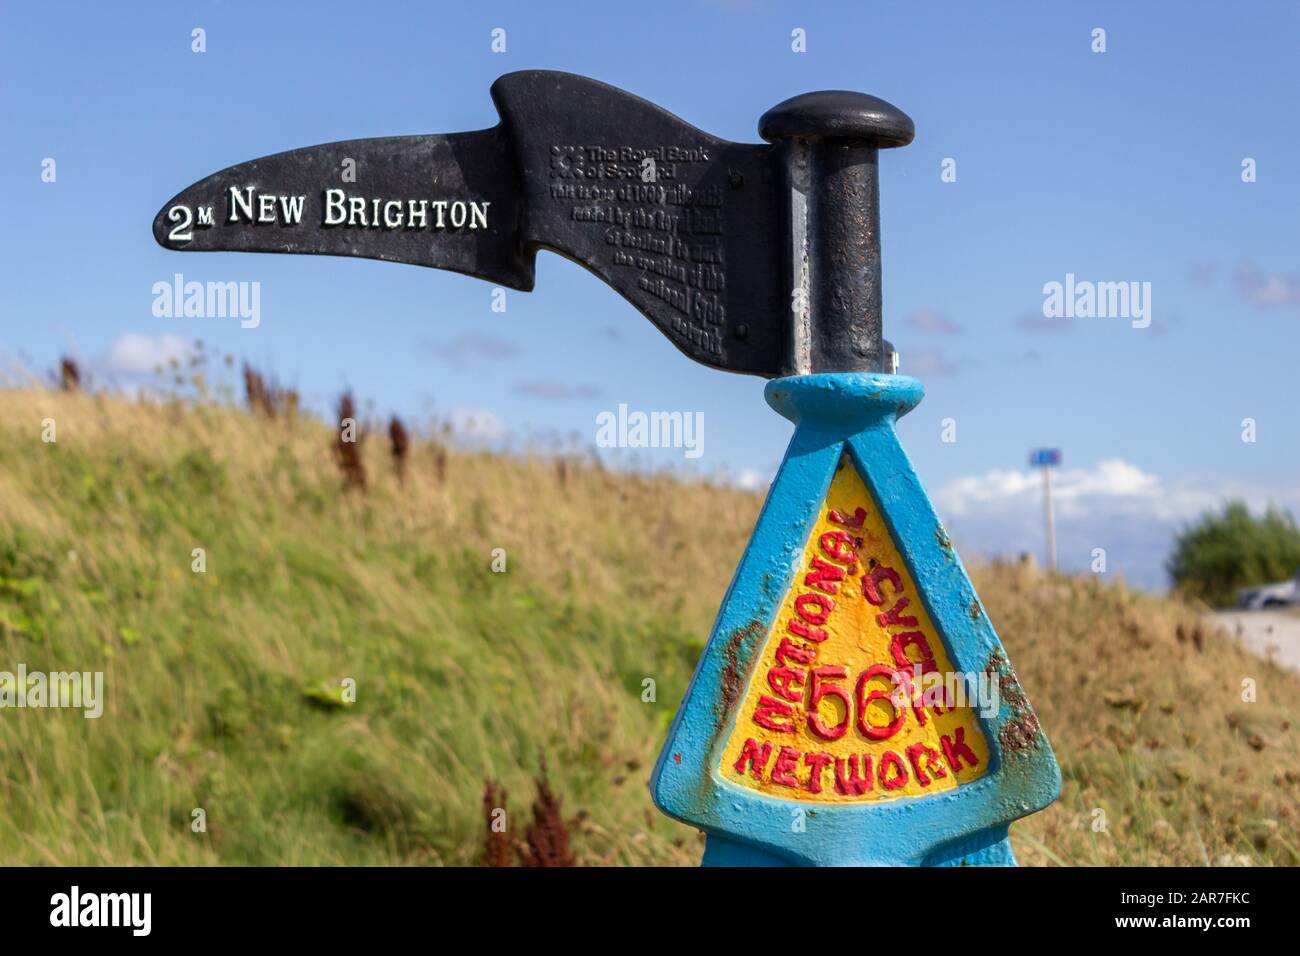 National cycle network signpost to New Brighton on Wirral coastal path, Wallasey Stock Photo